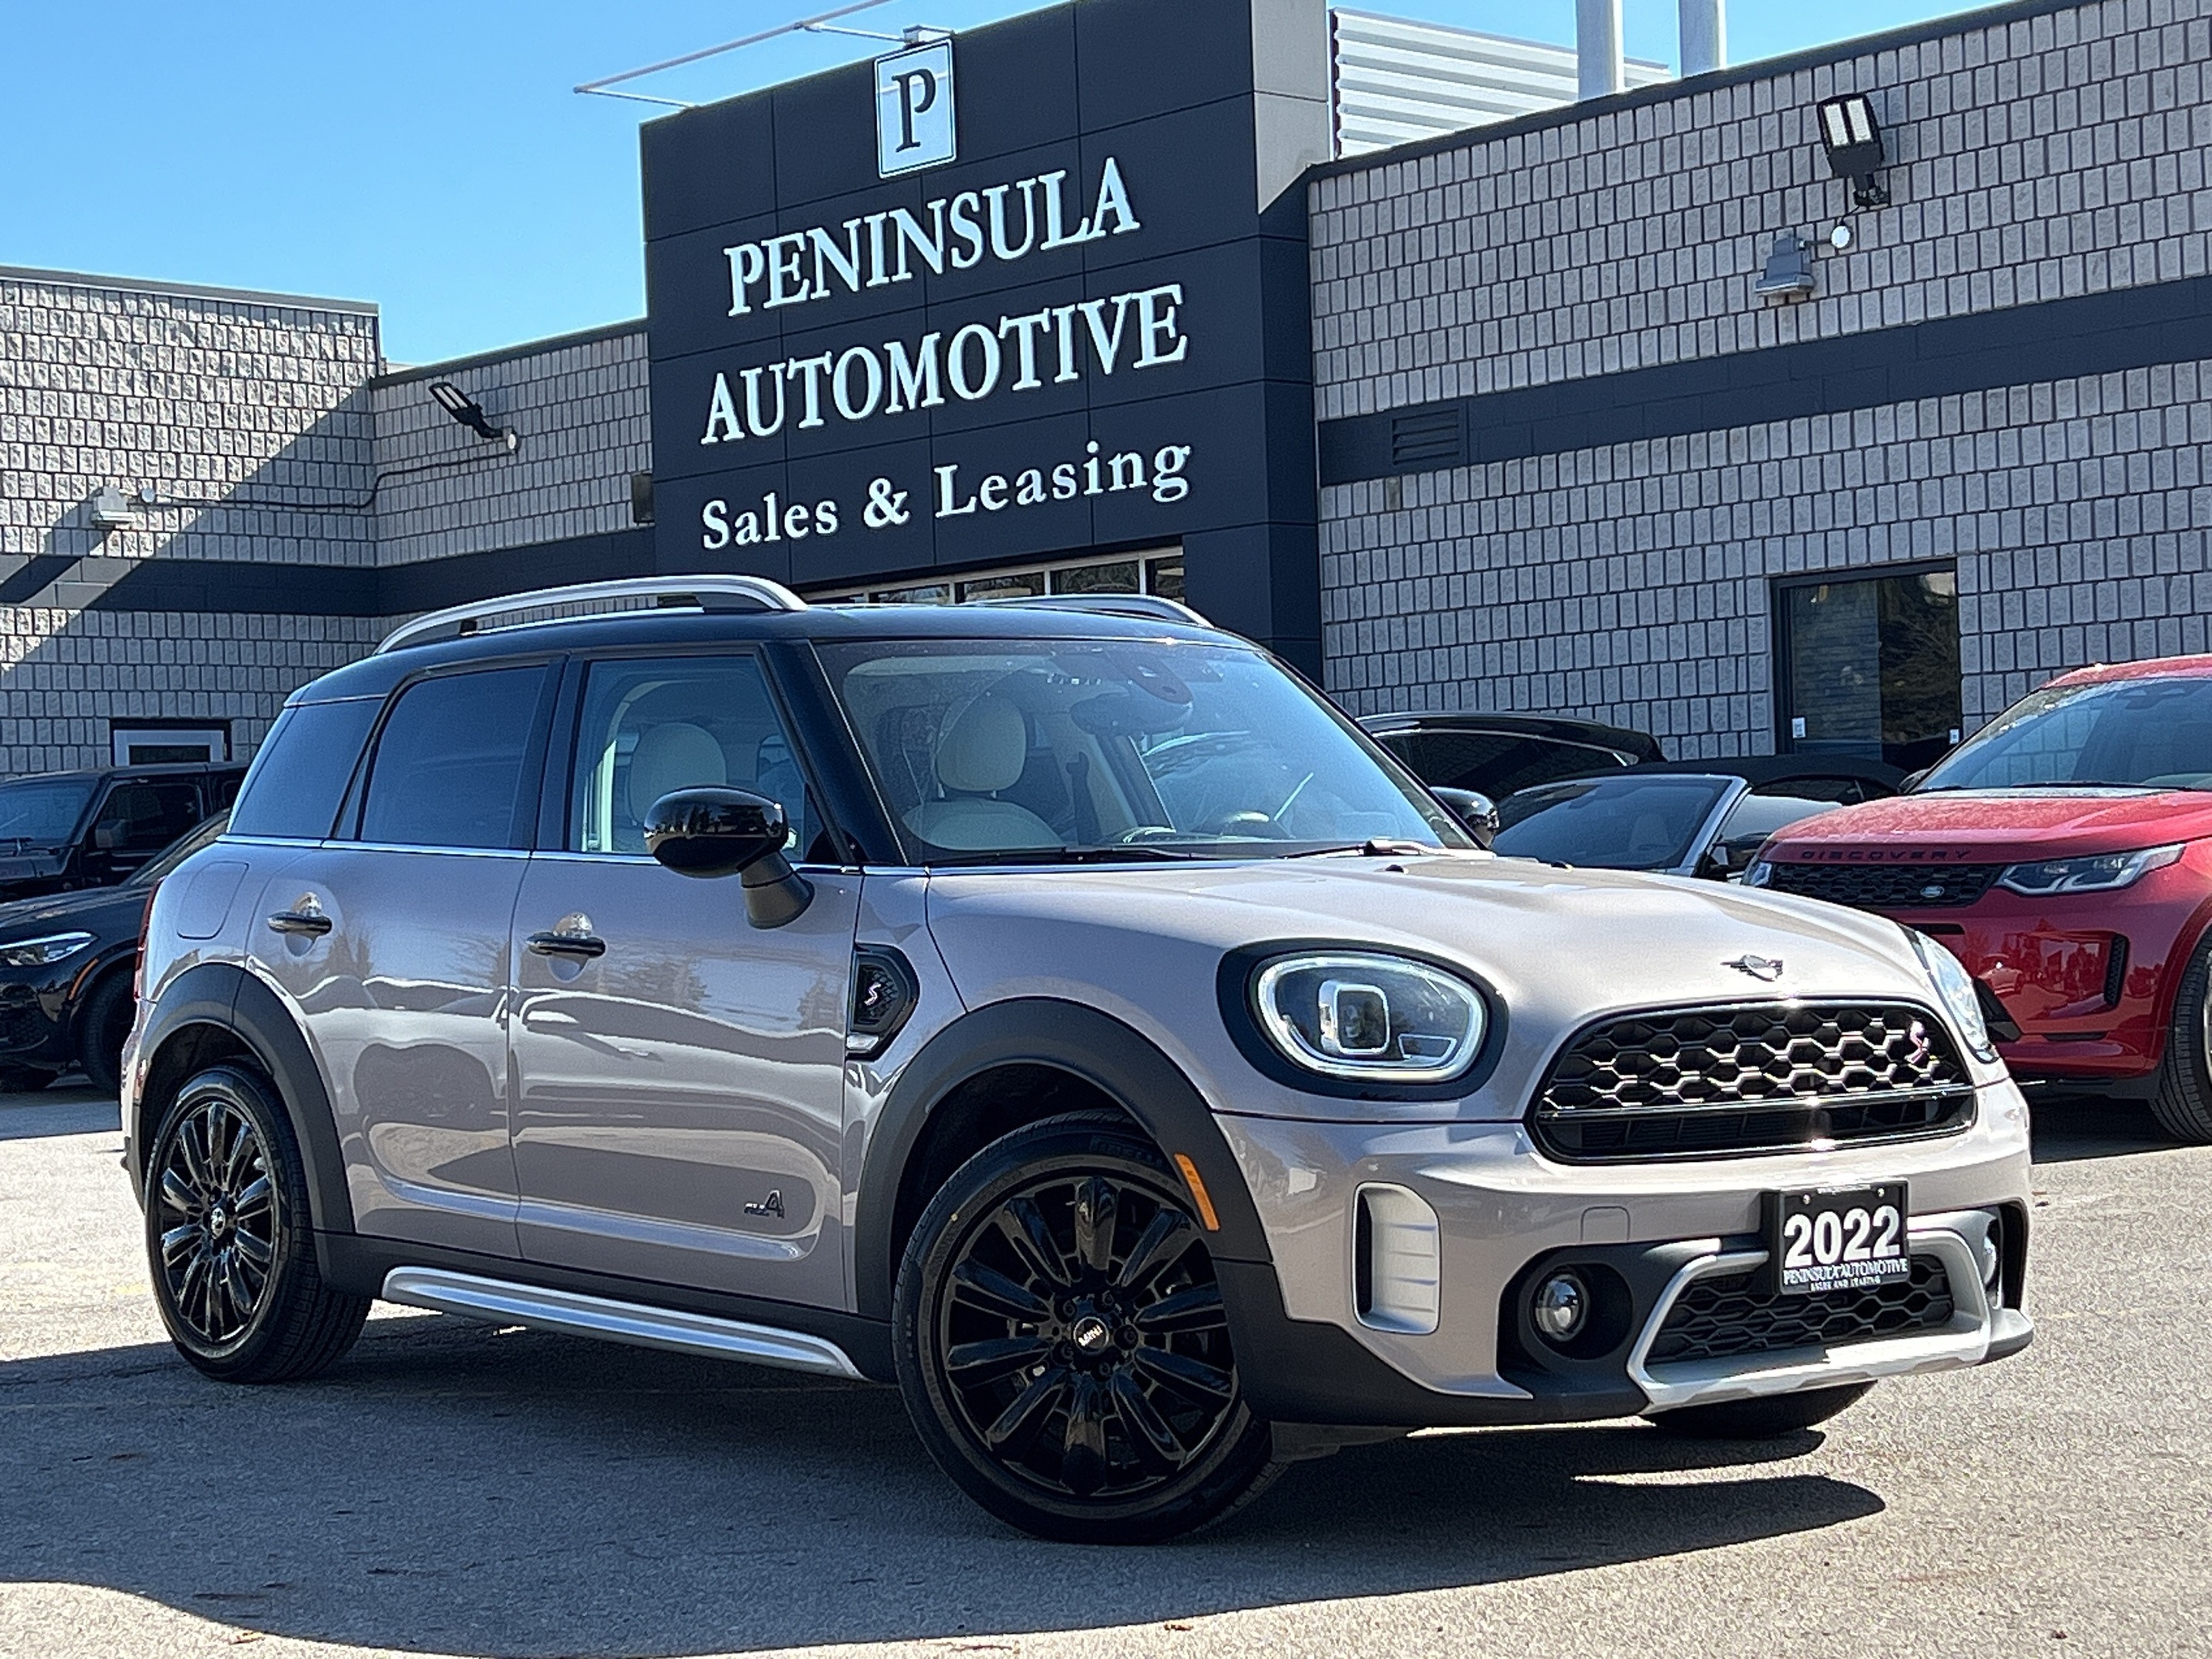 2022 MINI Countryman S,PREMIER +,NAV,CHESTER LEATHER,PANO,HEADS UP